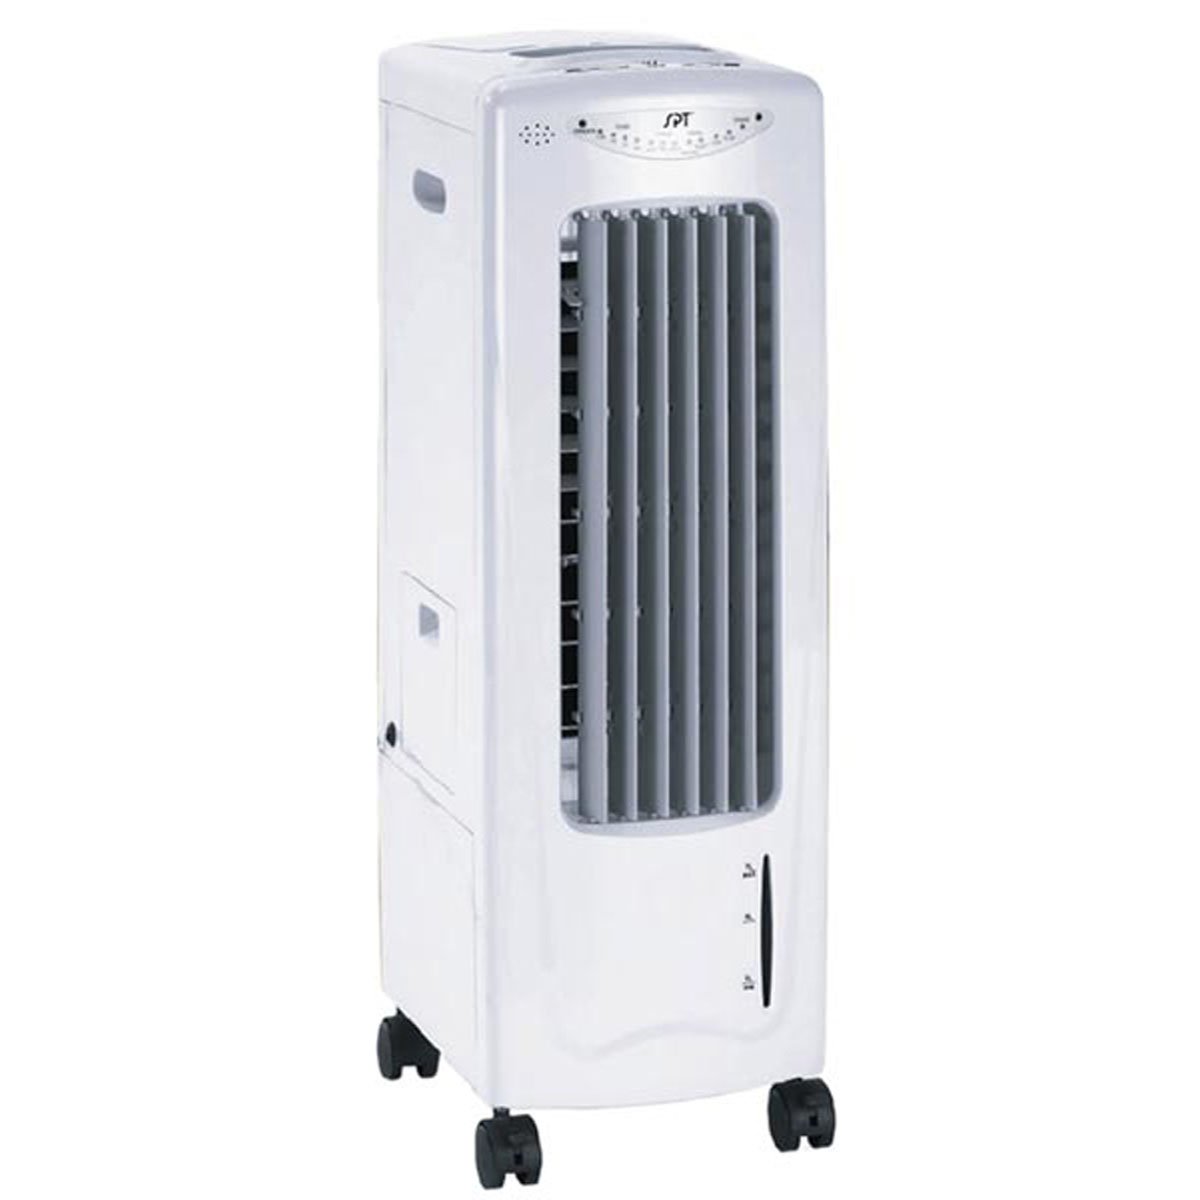 SPT SF-610 Portable Cooling Fan with Ionizer